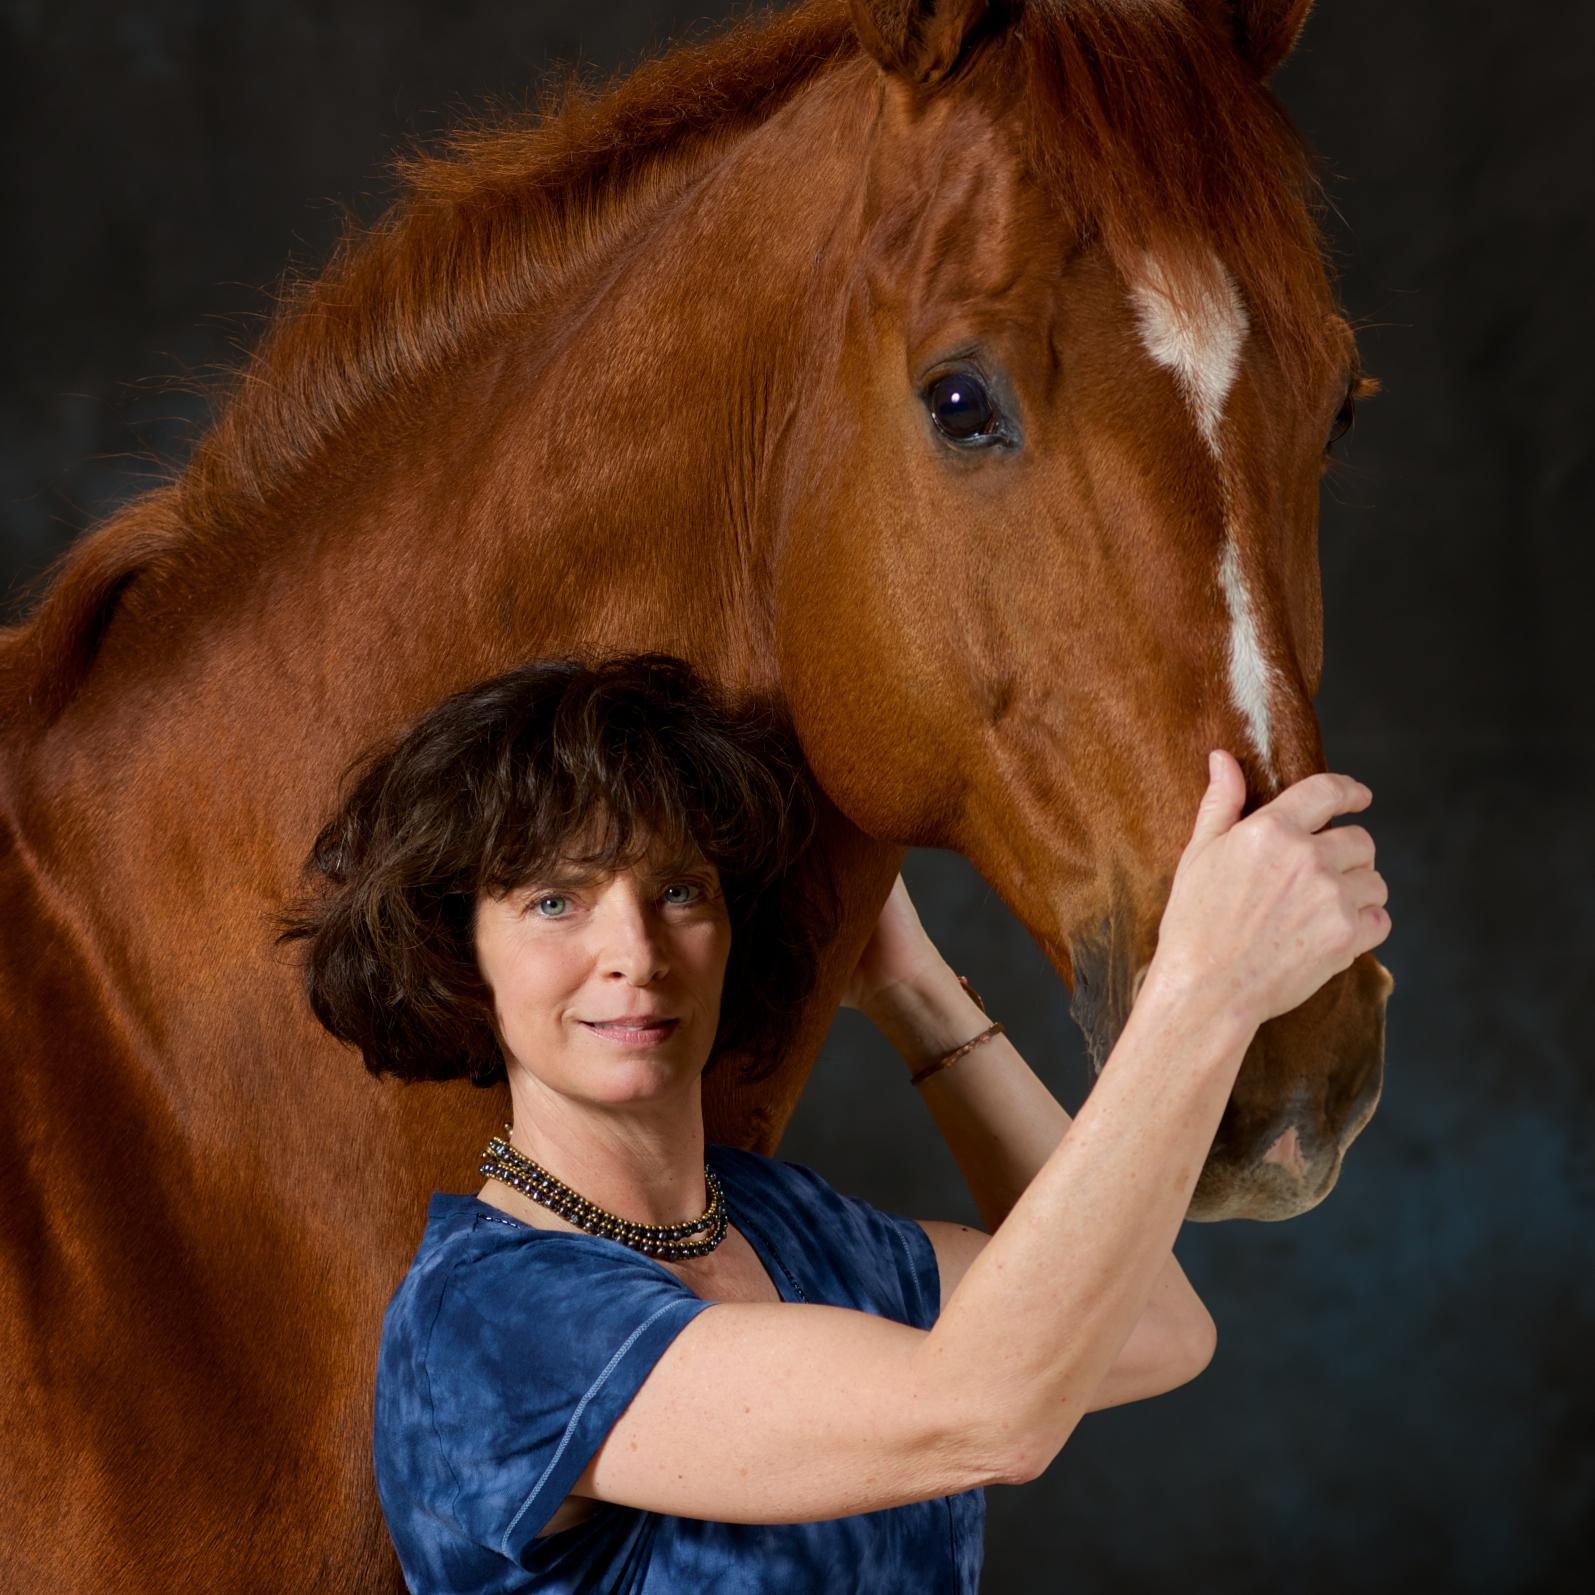 Body Awareness expert for equestrians and other athletes, dressage rider and trainer, animal lover in general, like to think outside the box, loves nature